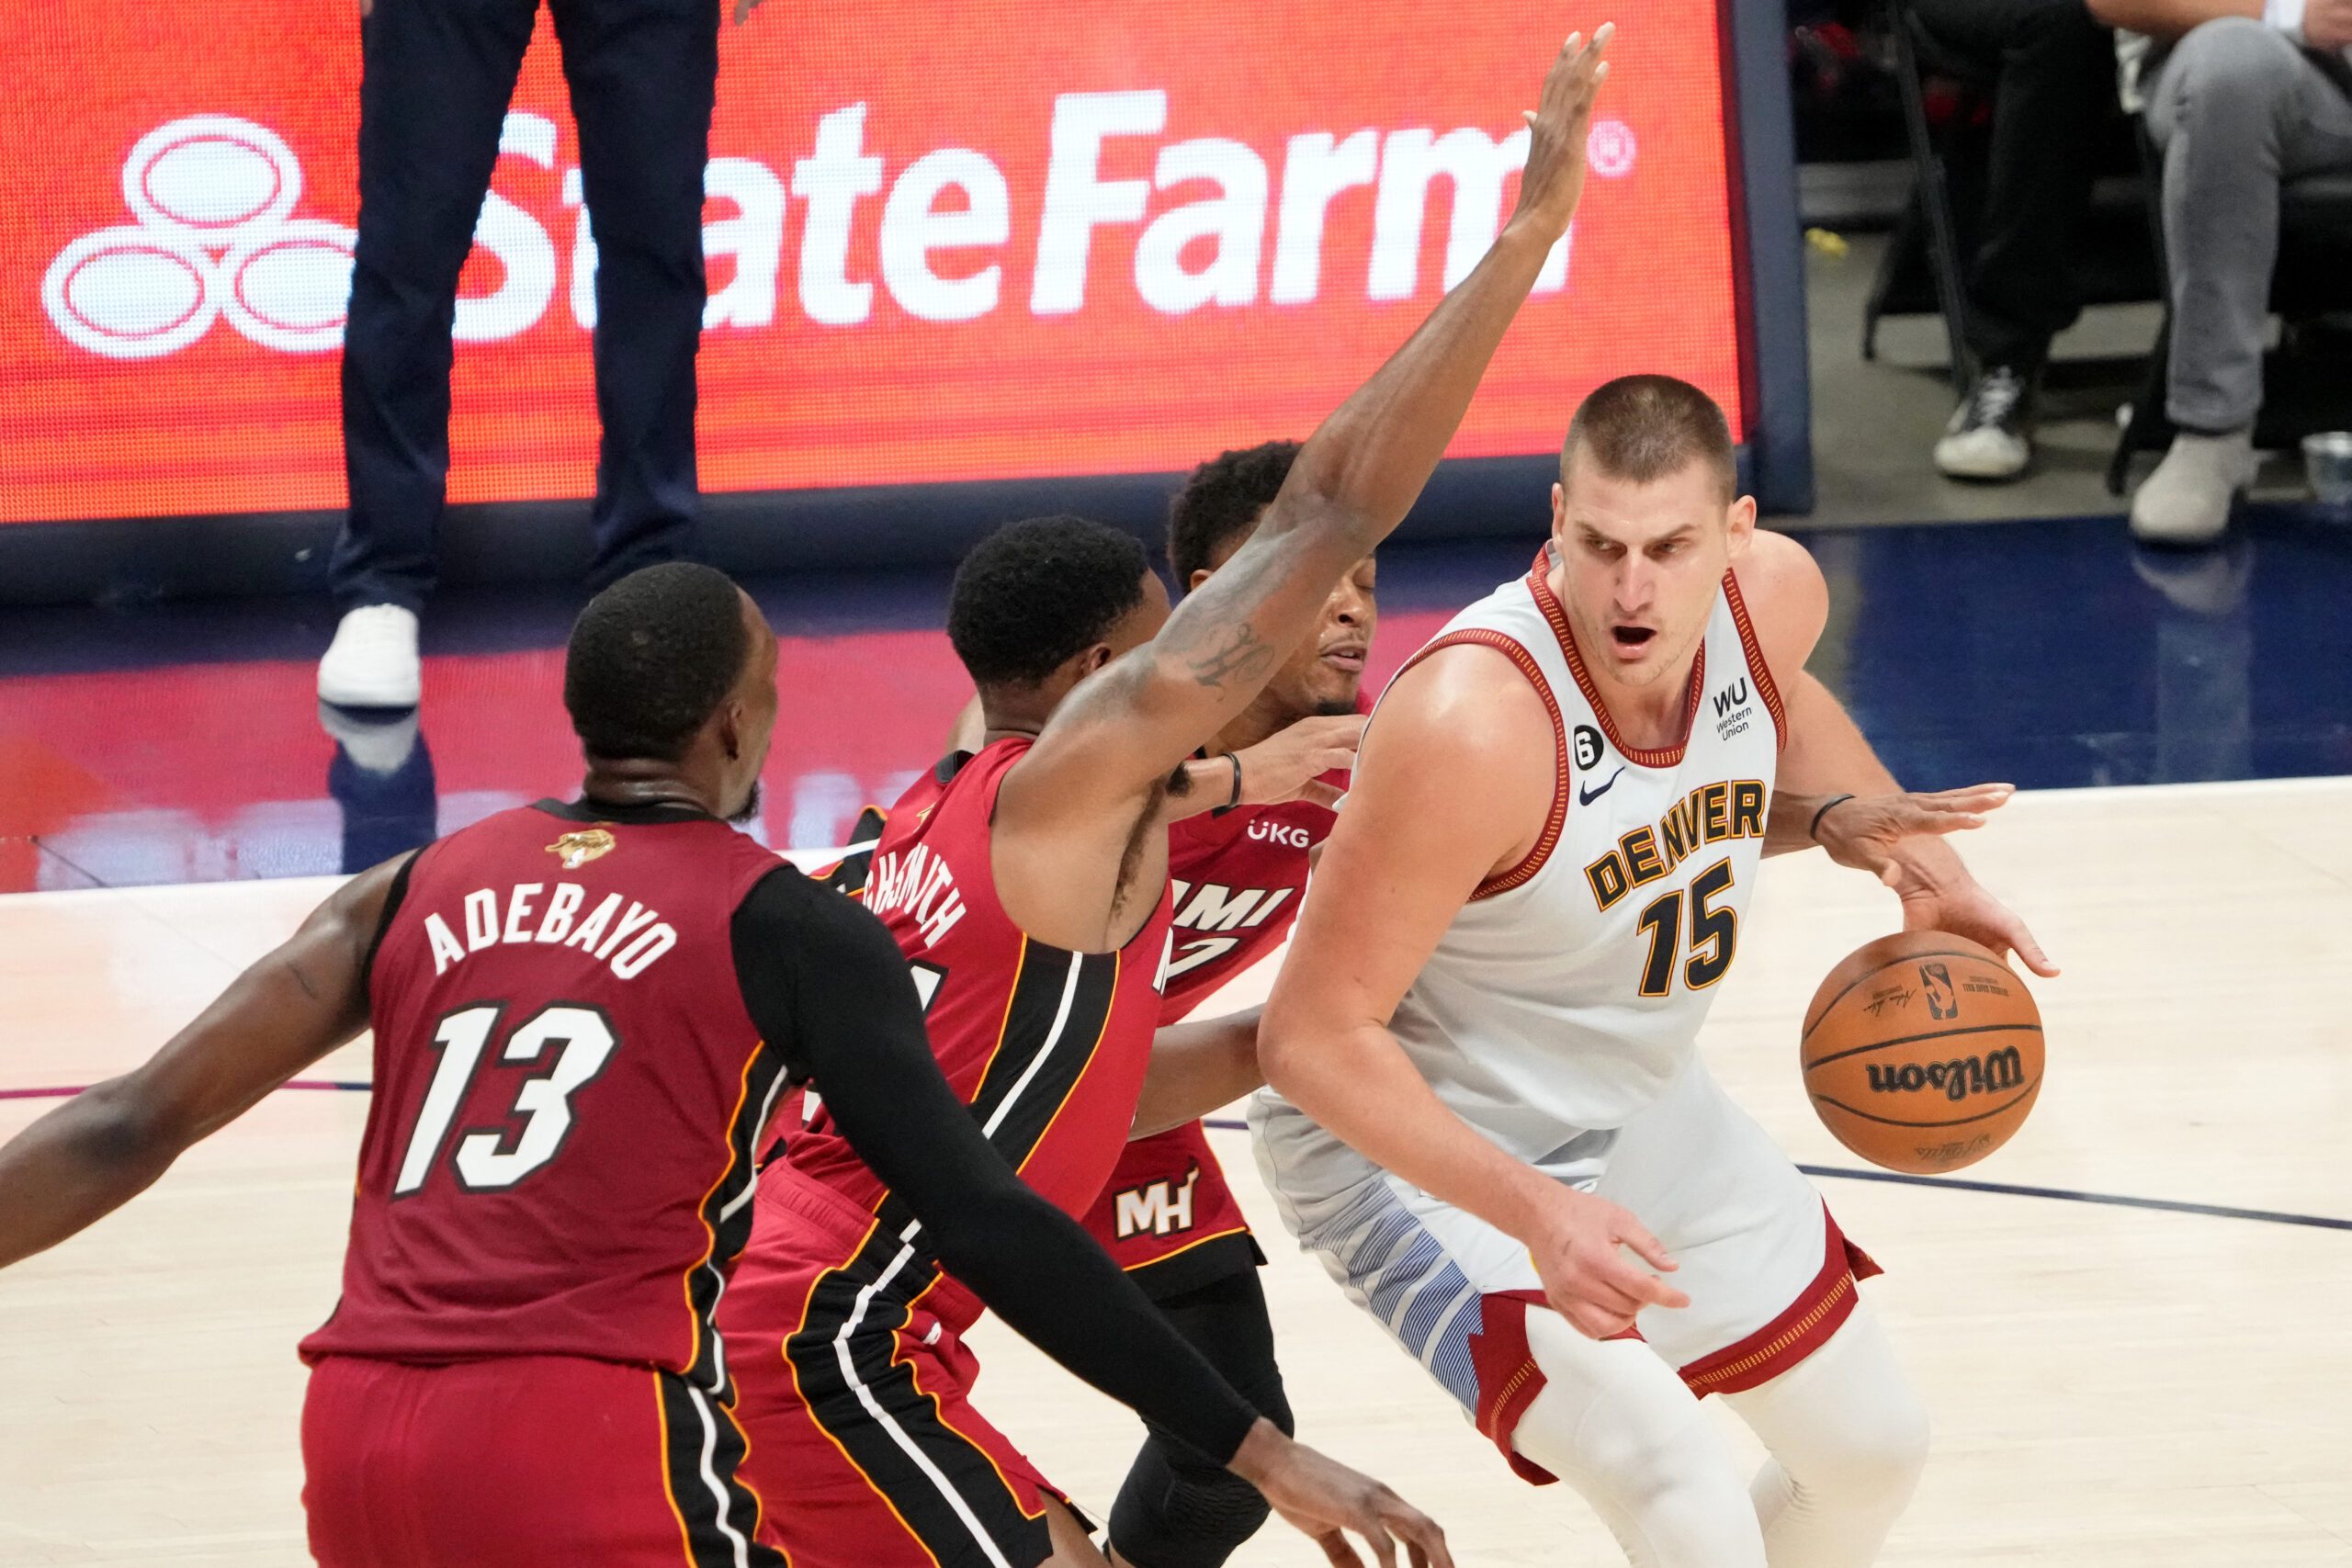 Nikola Jokic Leads The Denver Nuggets To The NBA Finals For The